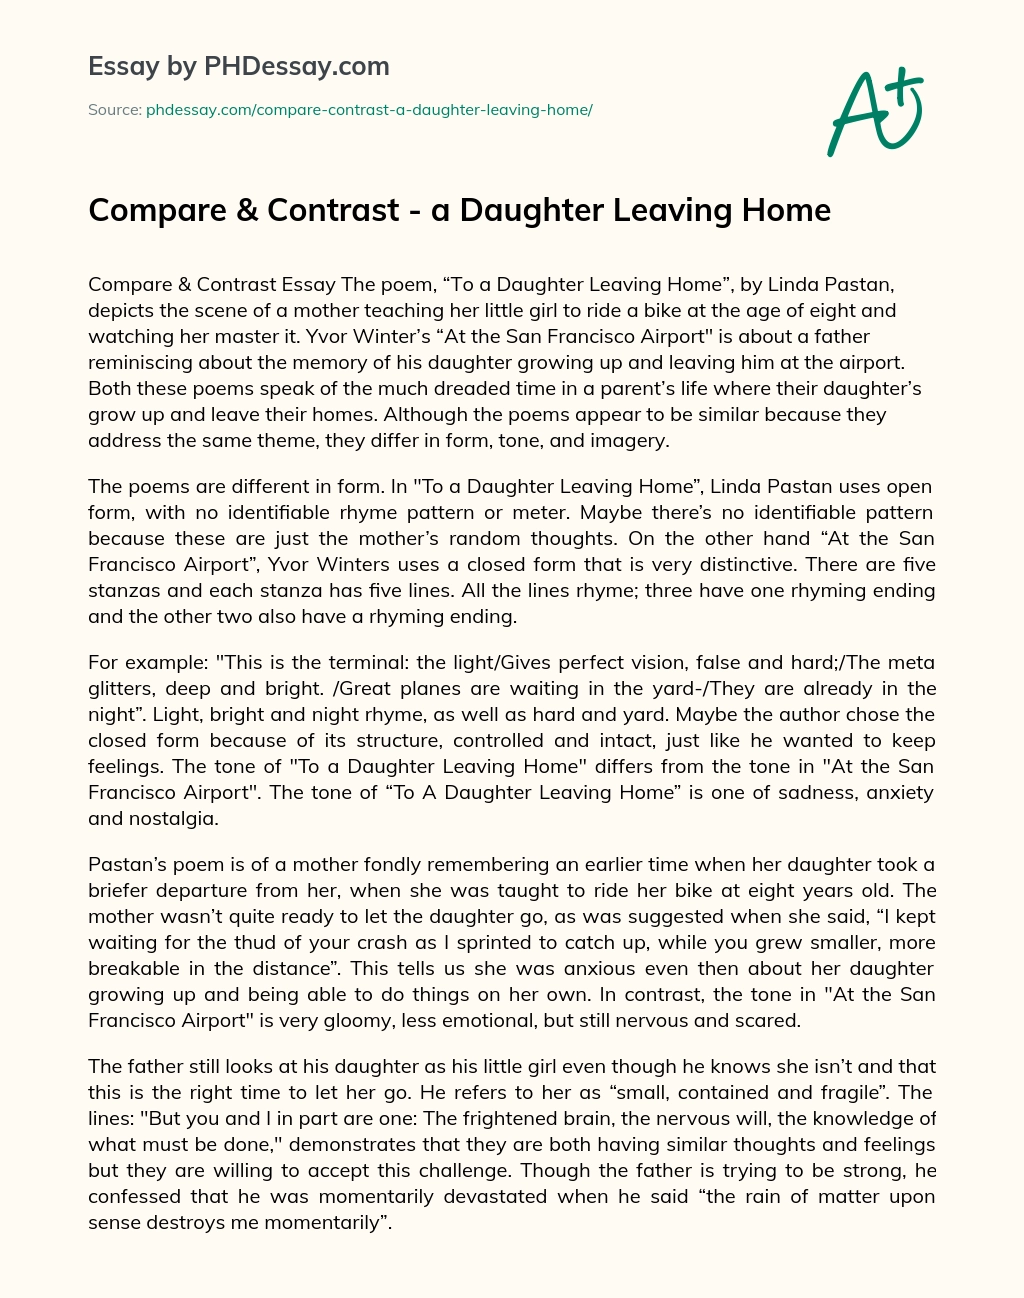 Compare & Contrast – a Daughter Leaving Home essay